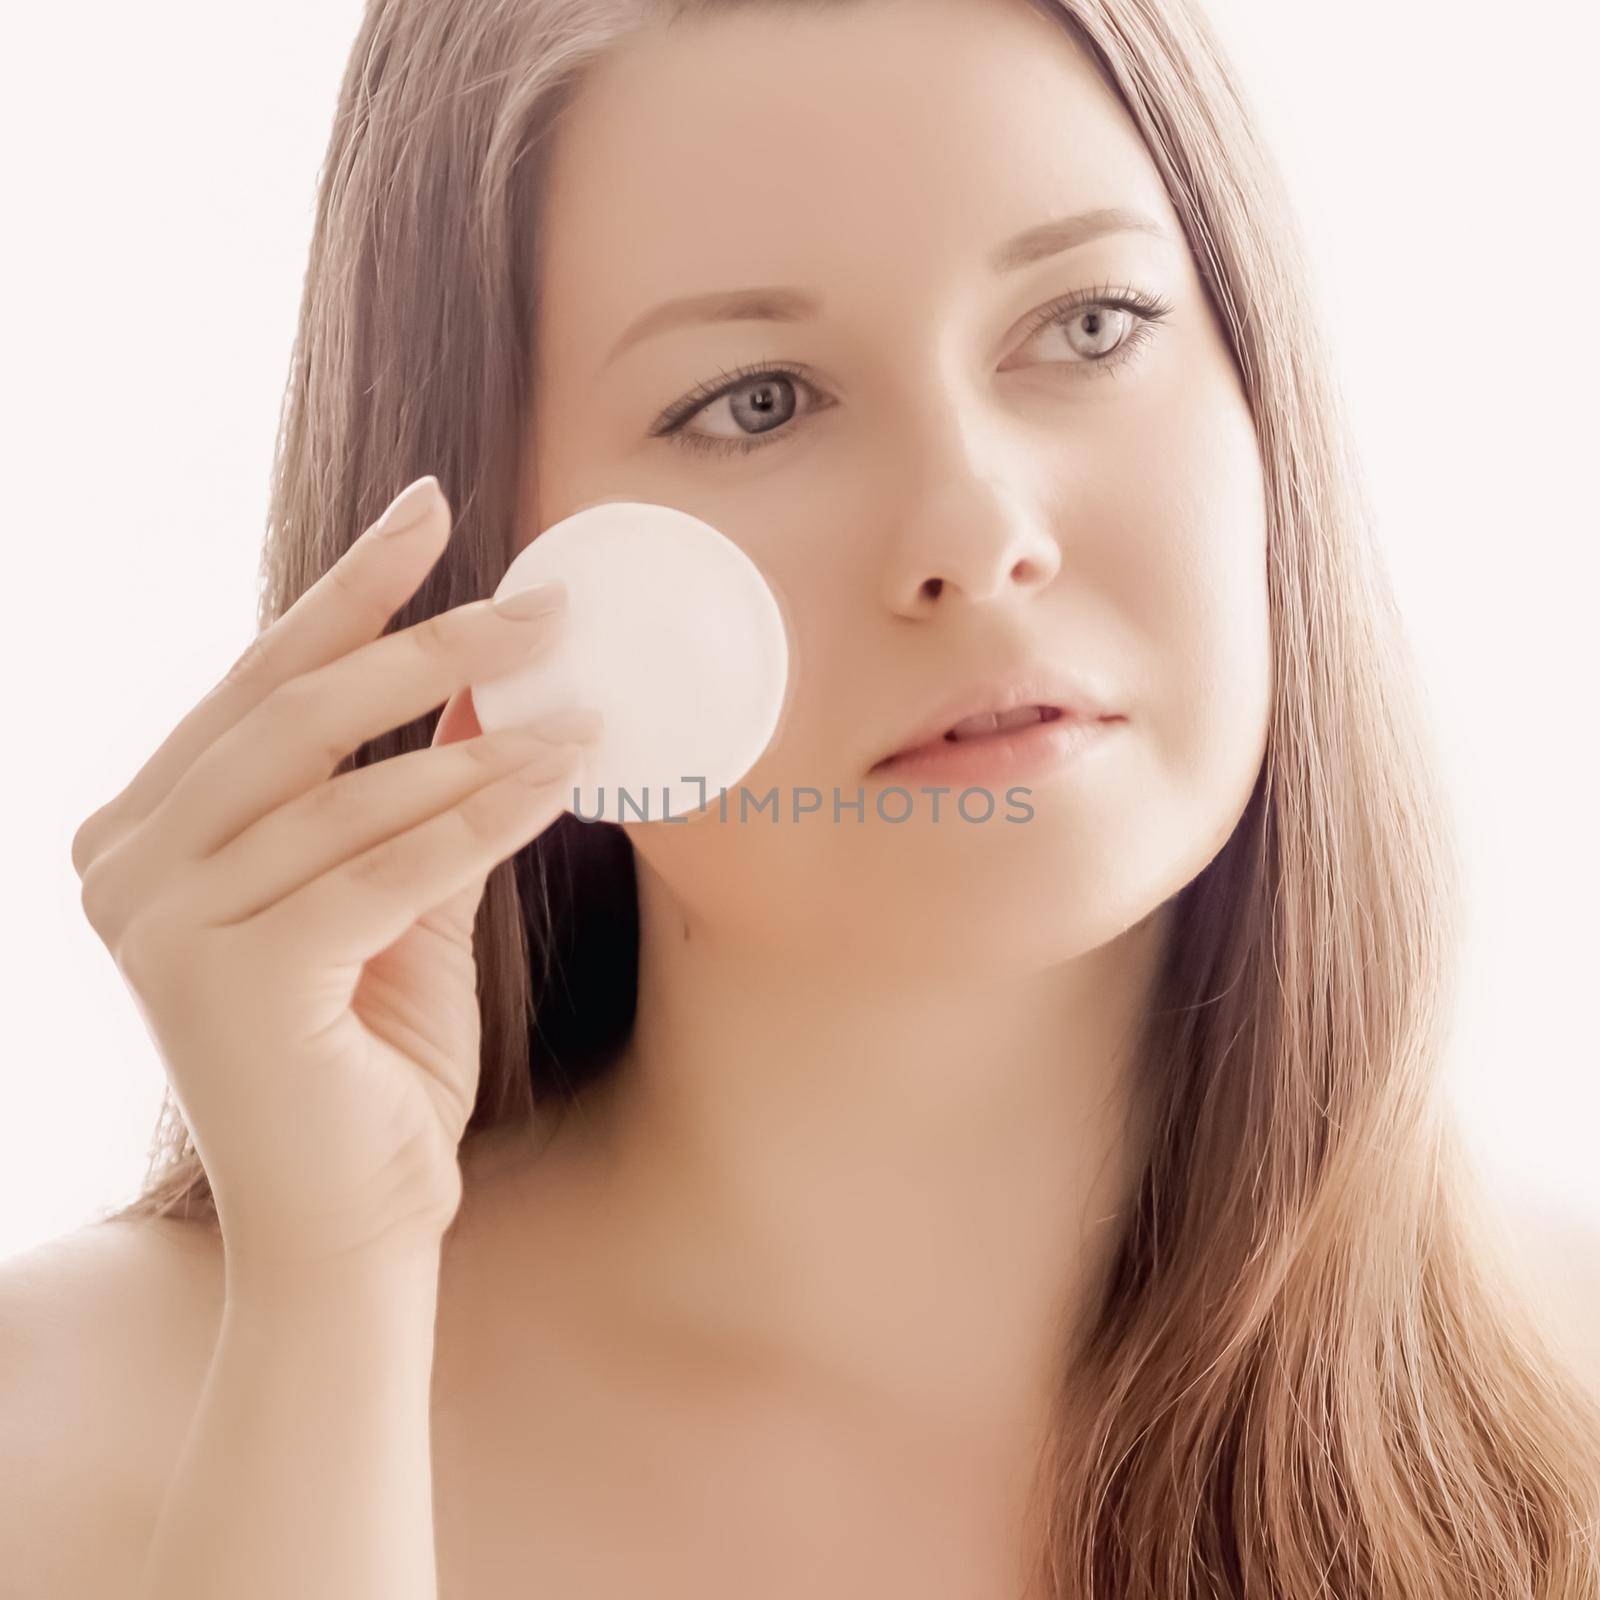 Beautiful woman with cotton pad, perfect skin and shiny hair as make-up, health and wellness concept. Face portrait of young female model for skincare cosmetics and luxury beauty ad design by Anneleven